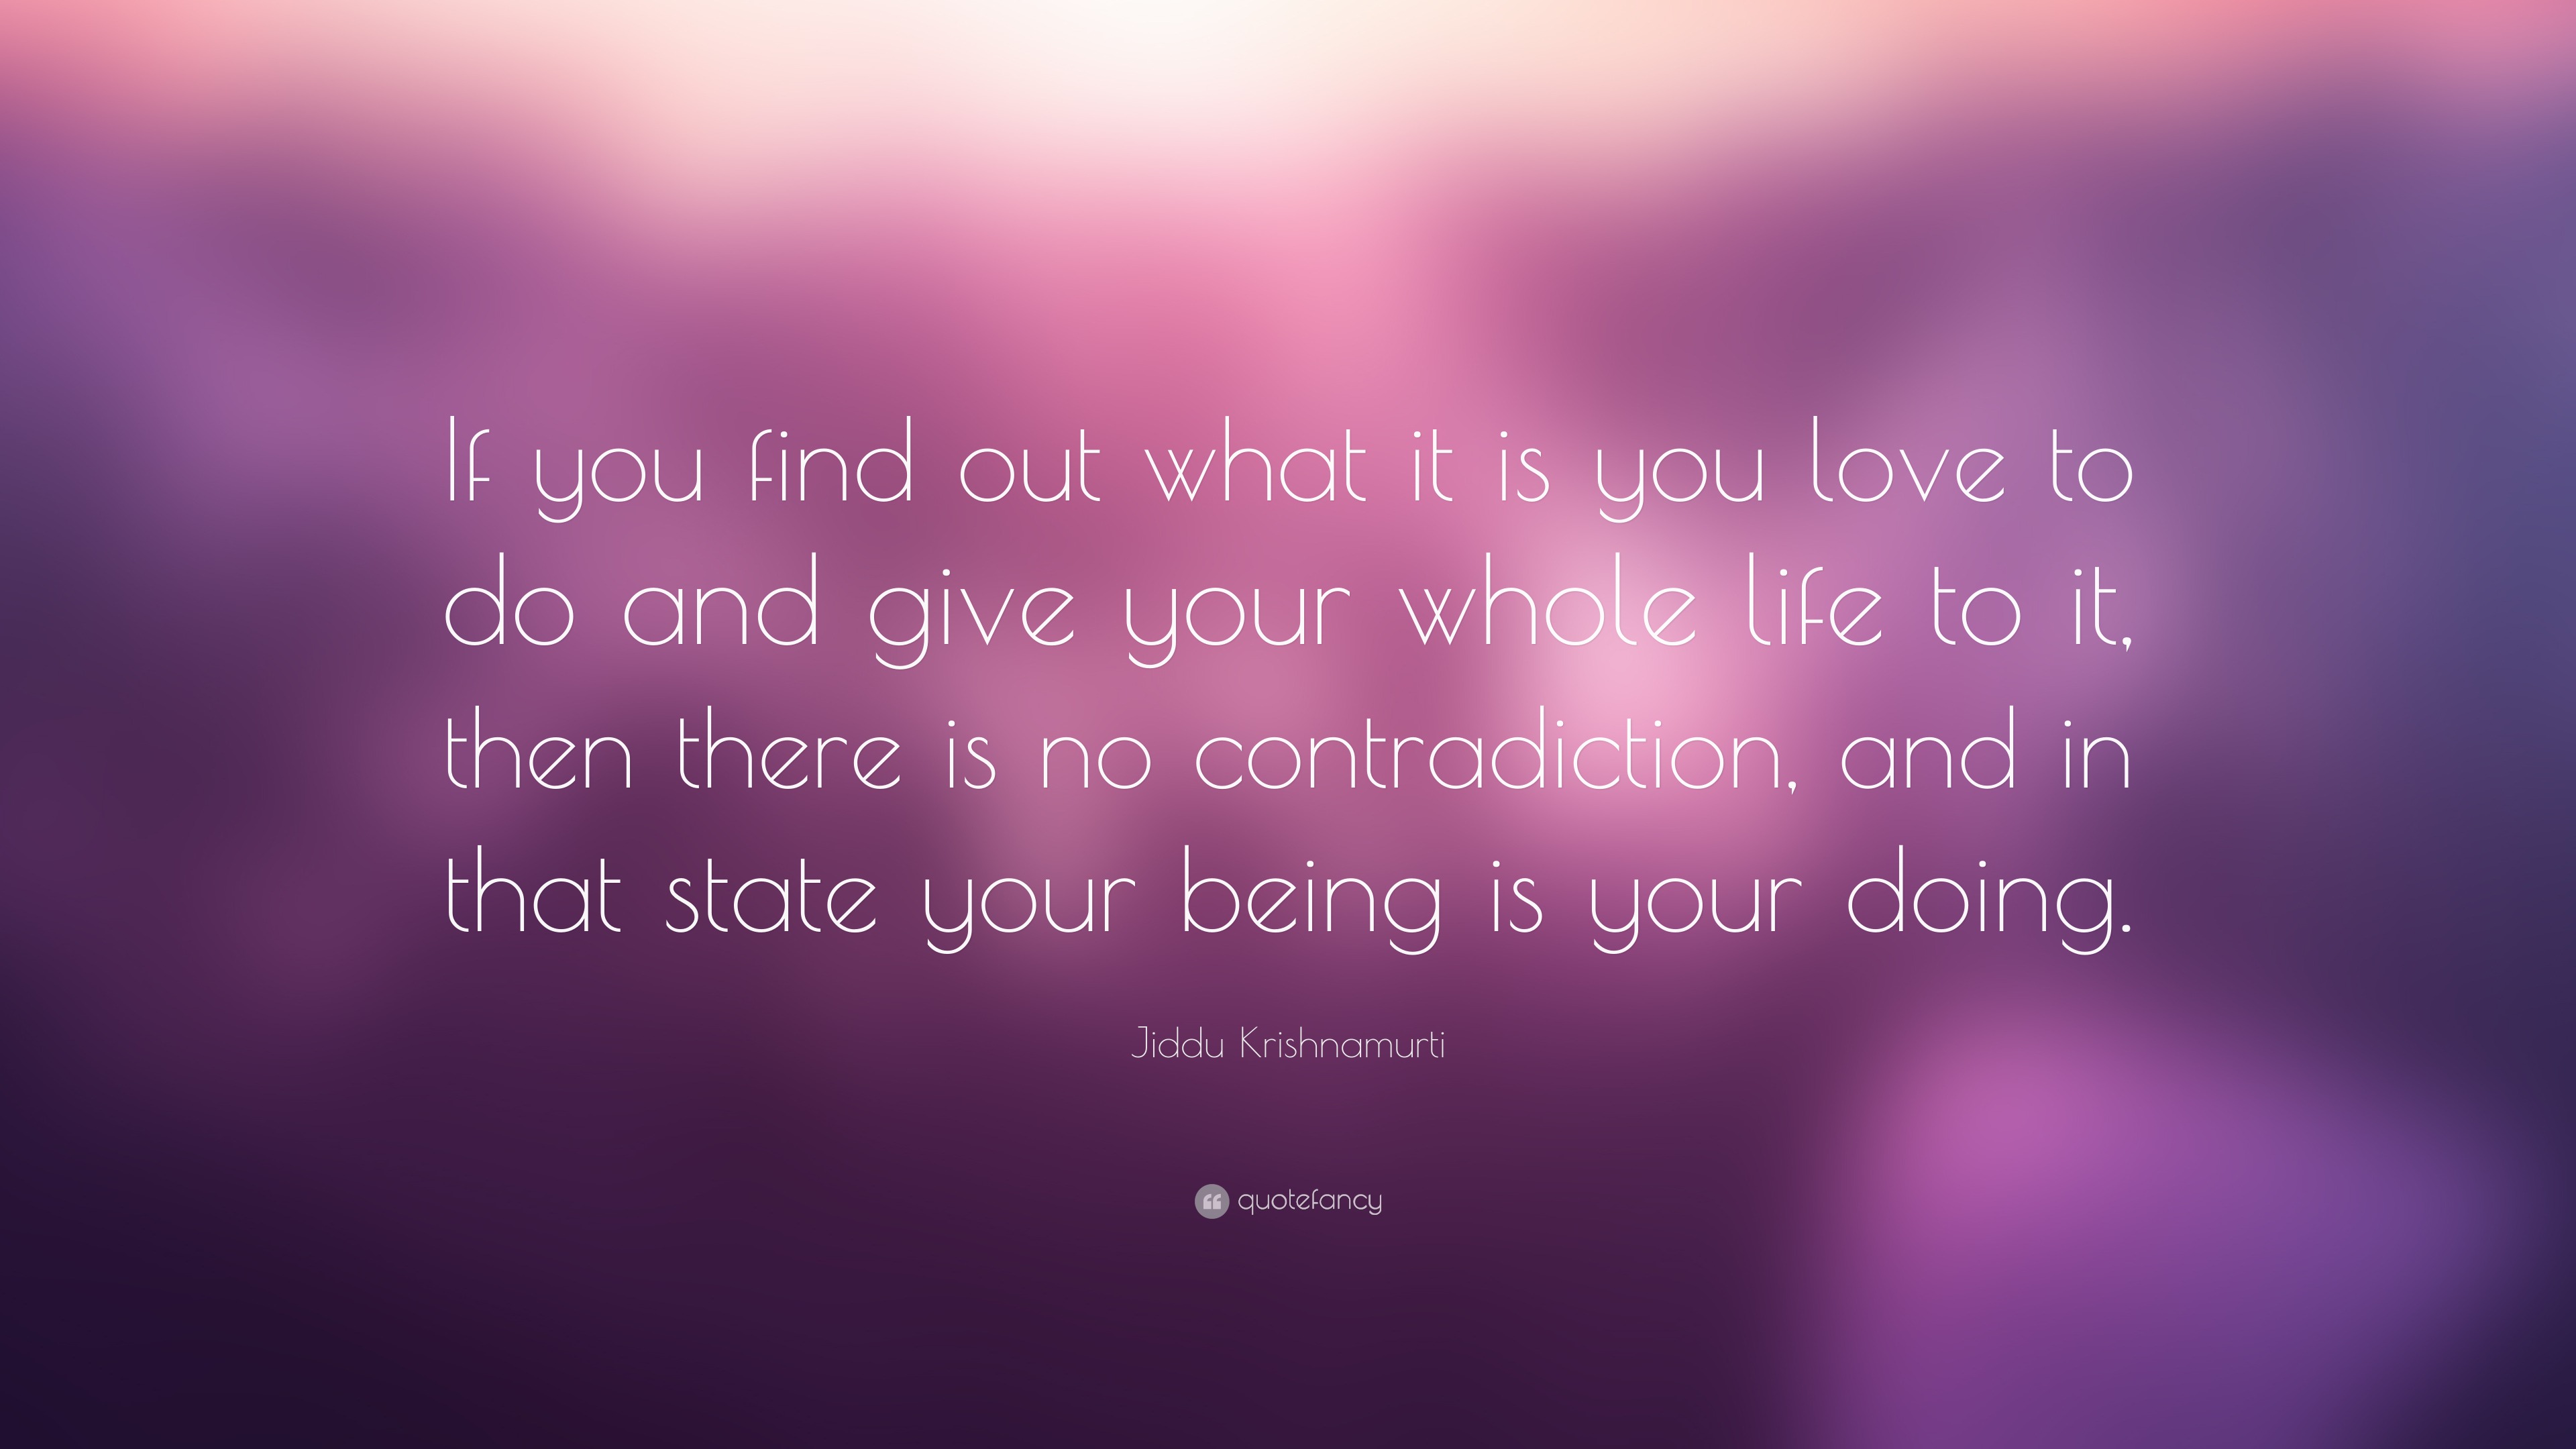 Jiddu Krishnamurti Quote: “If you find out what it is you love to do ...